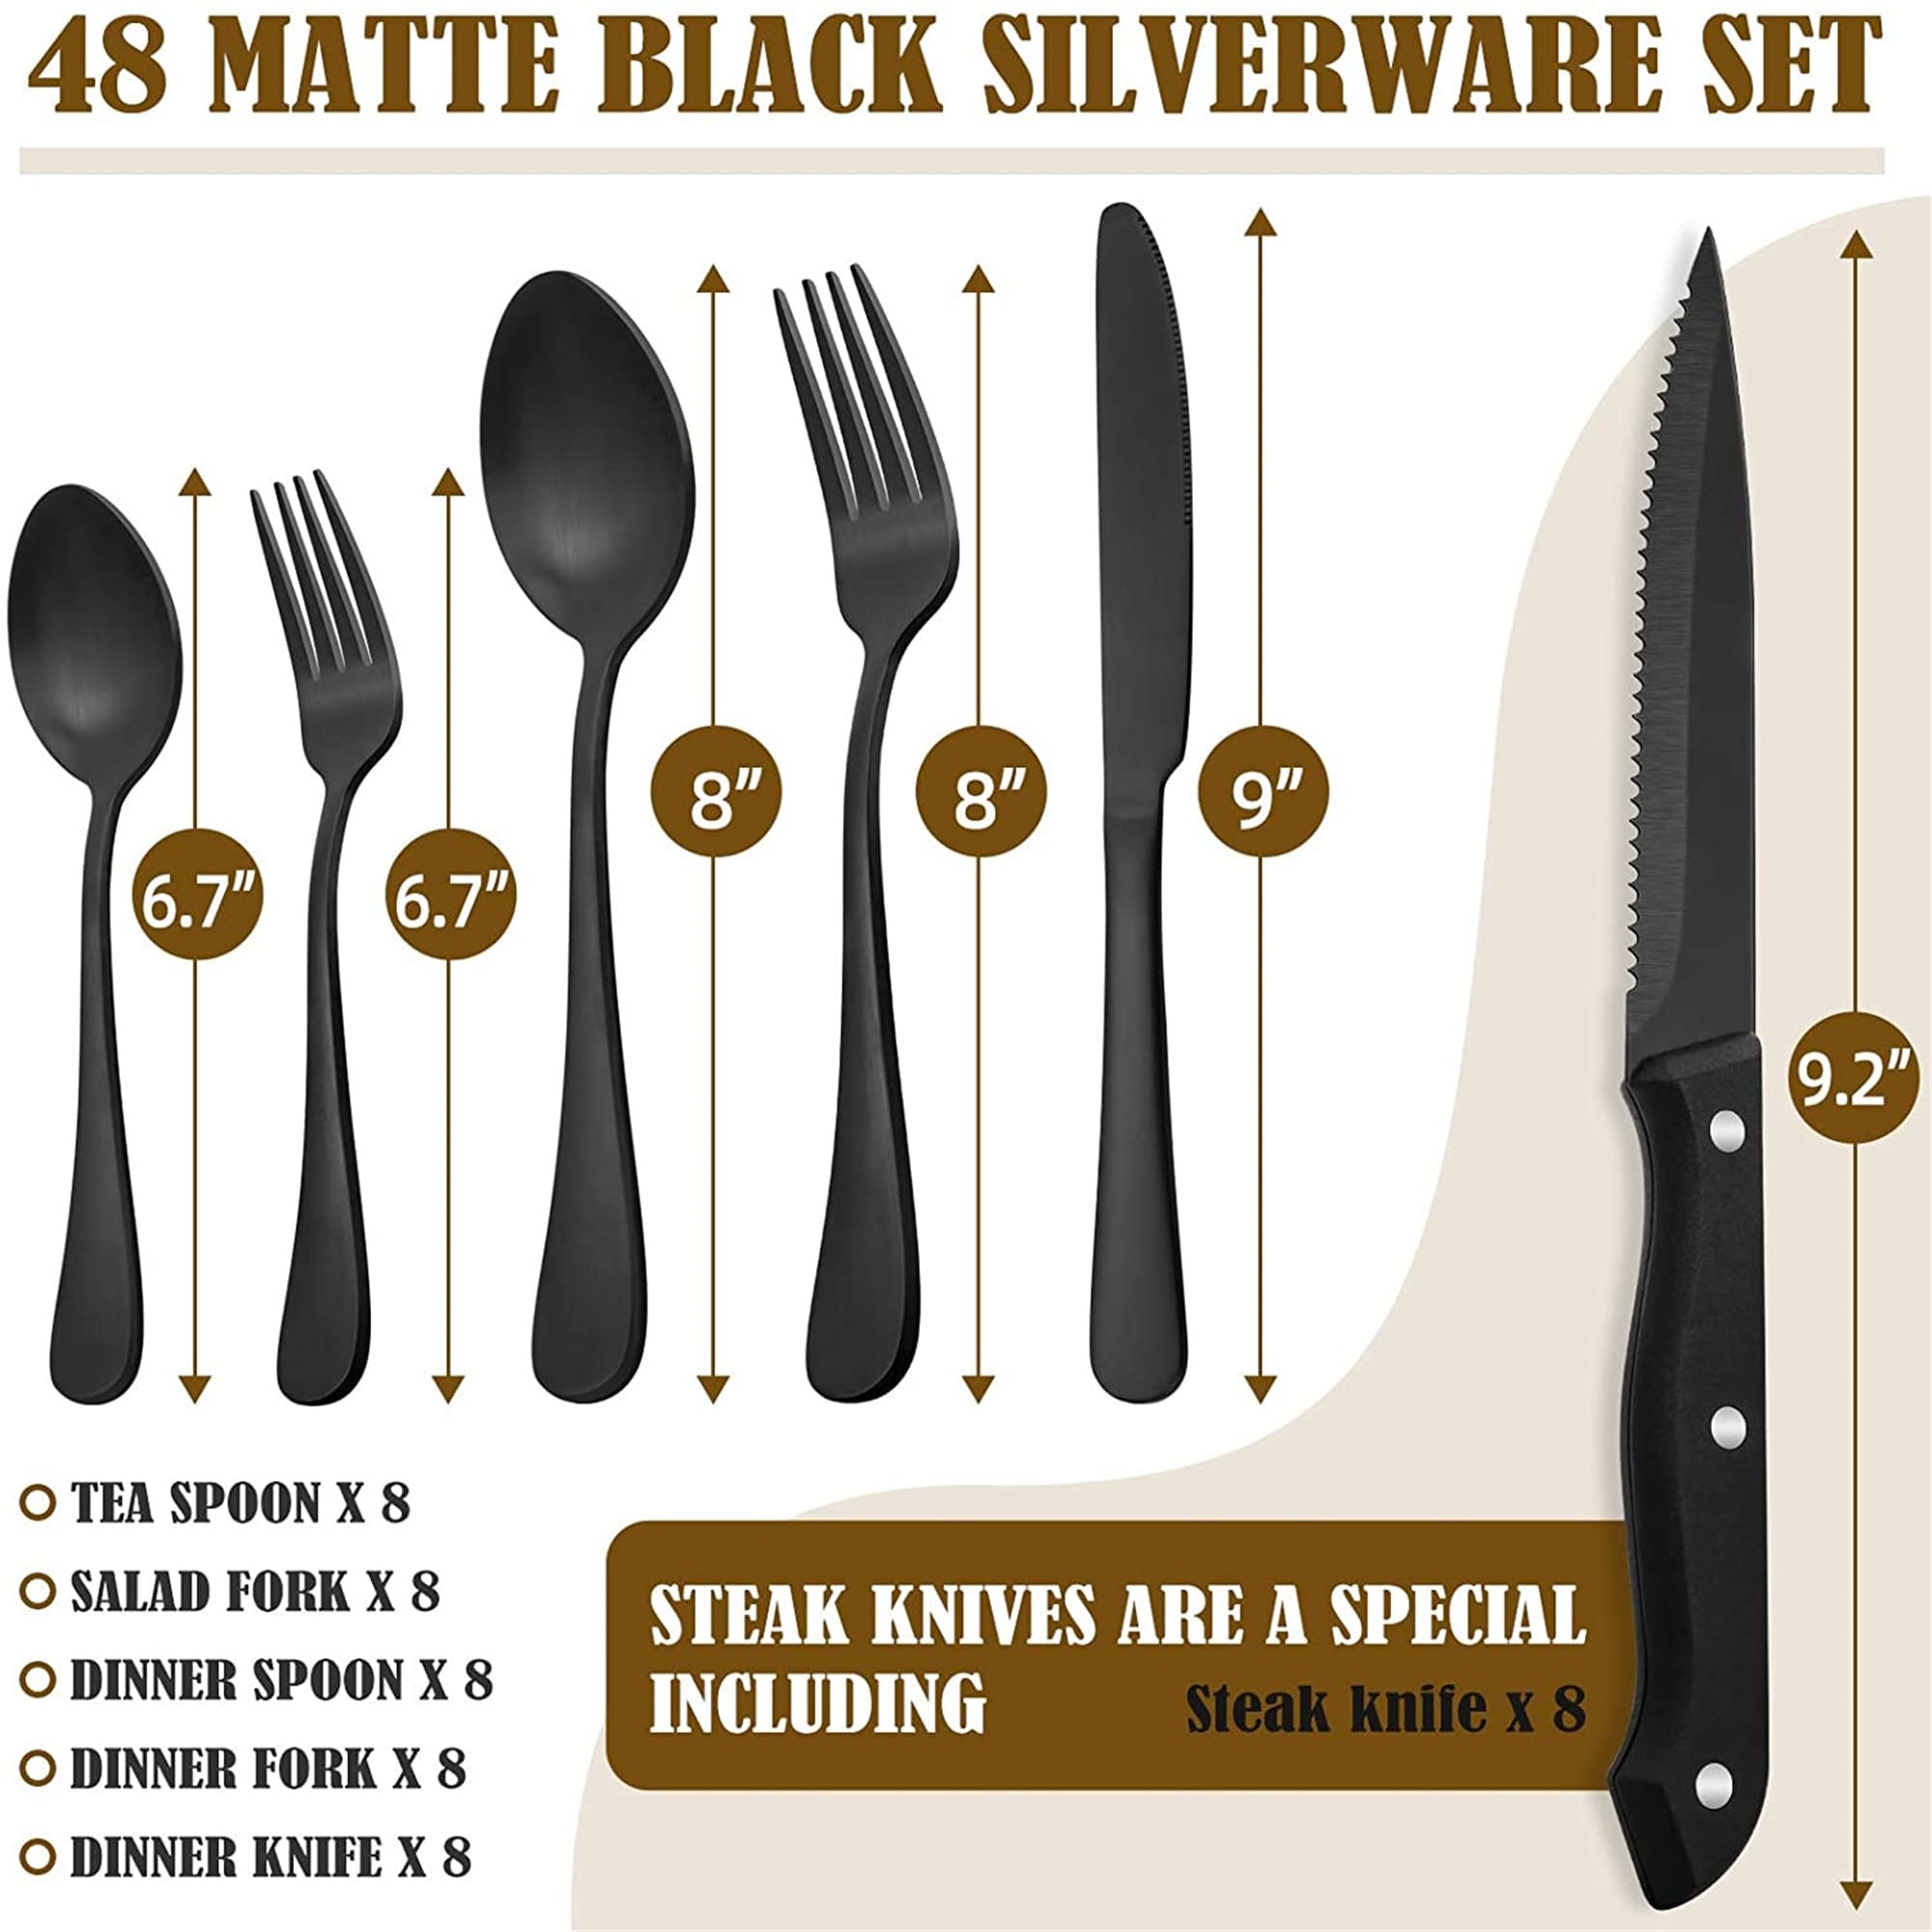 https://ak1.ostkcdn.com/images/products/is/images/direct/fd0cc540059a6c2dbcc75d3ac1f9008d96eae7a4/48-Piece-Matte-Black-Silverware-Set-for-8-by-Hiware%2C-Stainless-Steel-Flatware-Set-with-Steak-Knives.jpg